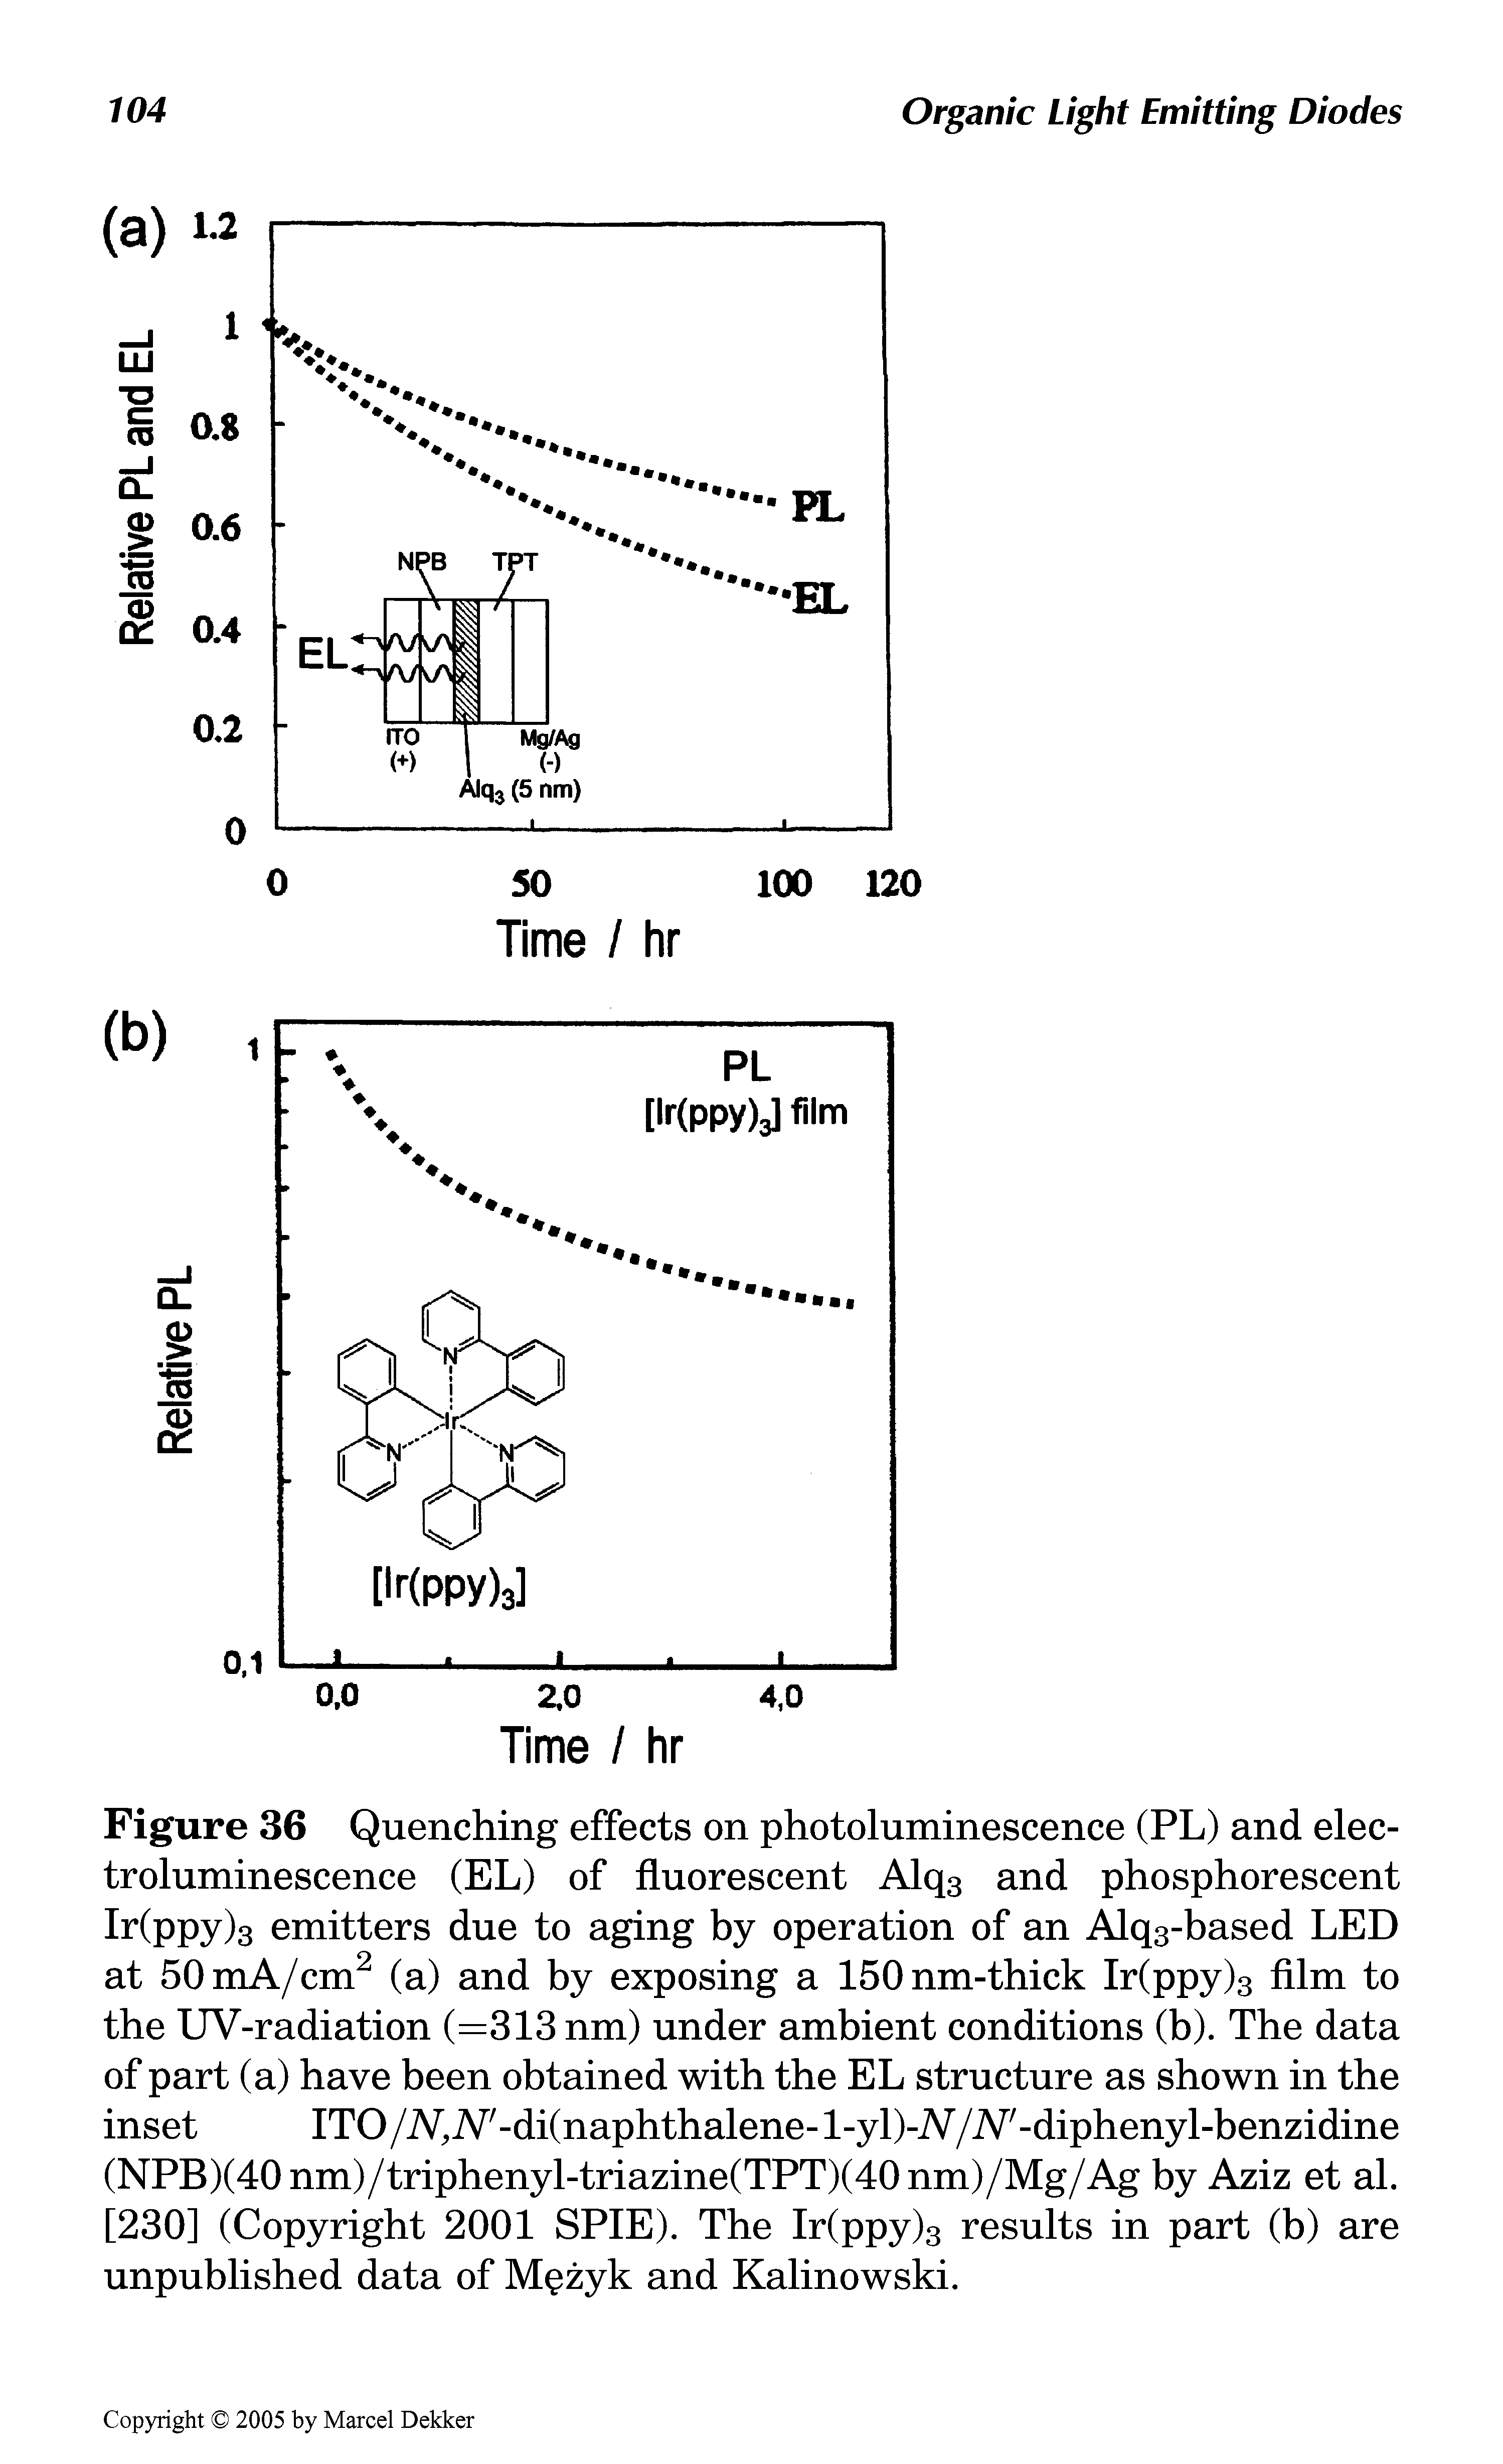 Figure 36 Quenching effects on photoluminescence (PL) and electroluminescence (EL) of fluorescent Alq3 and phosphorescent Ir(ppy)3 emitters due to aging by operation of an Alq3-based LED at 50mA/cm2 (a) and by exposing a 150nm-thick Ir(ppy)3 film to the UV-radiation (=313 nm) under ambient conditions (b). The data of part (a) have been obtained with the EL structure as shown in the inset ITO /N, AP-di(naphthalene- l-yl)-iV /AP-diphenyl-benzidine...